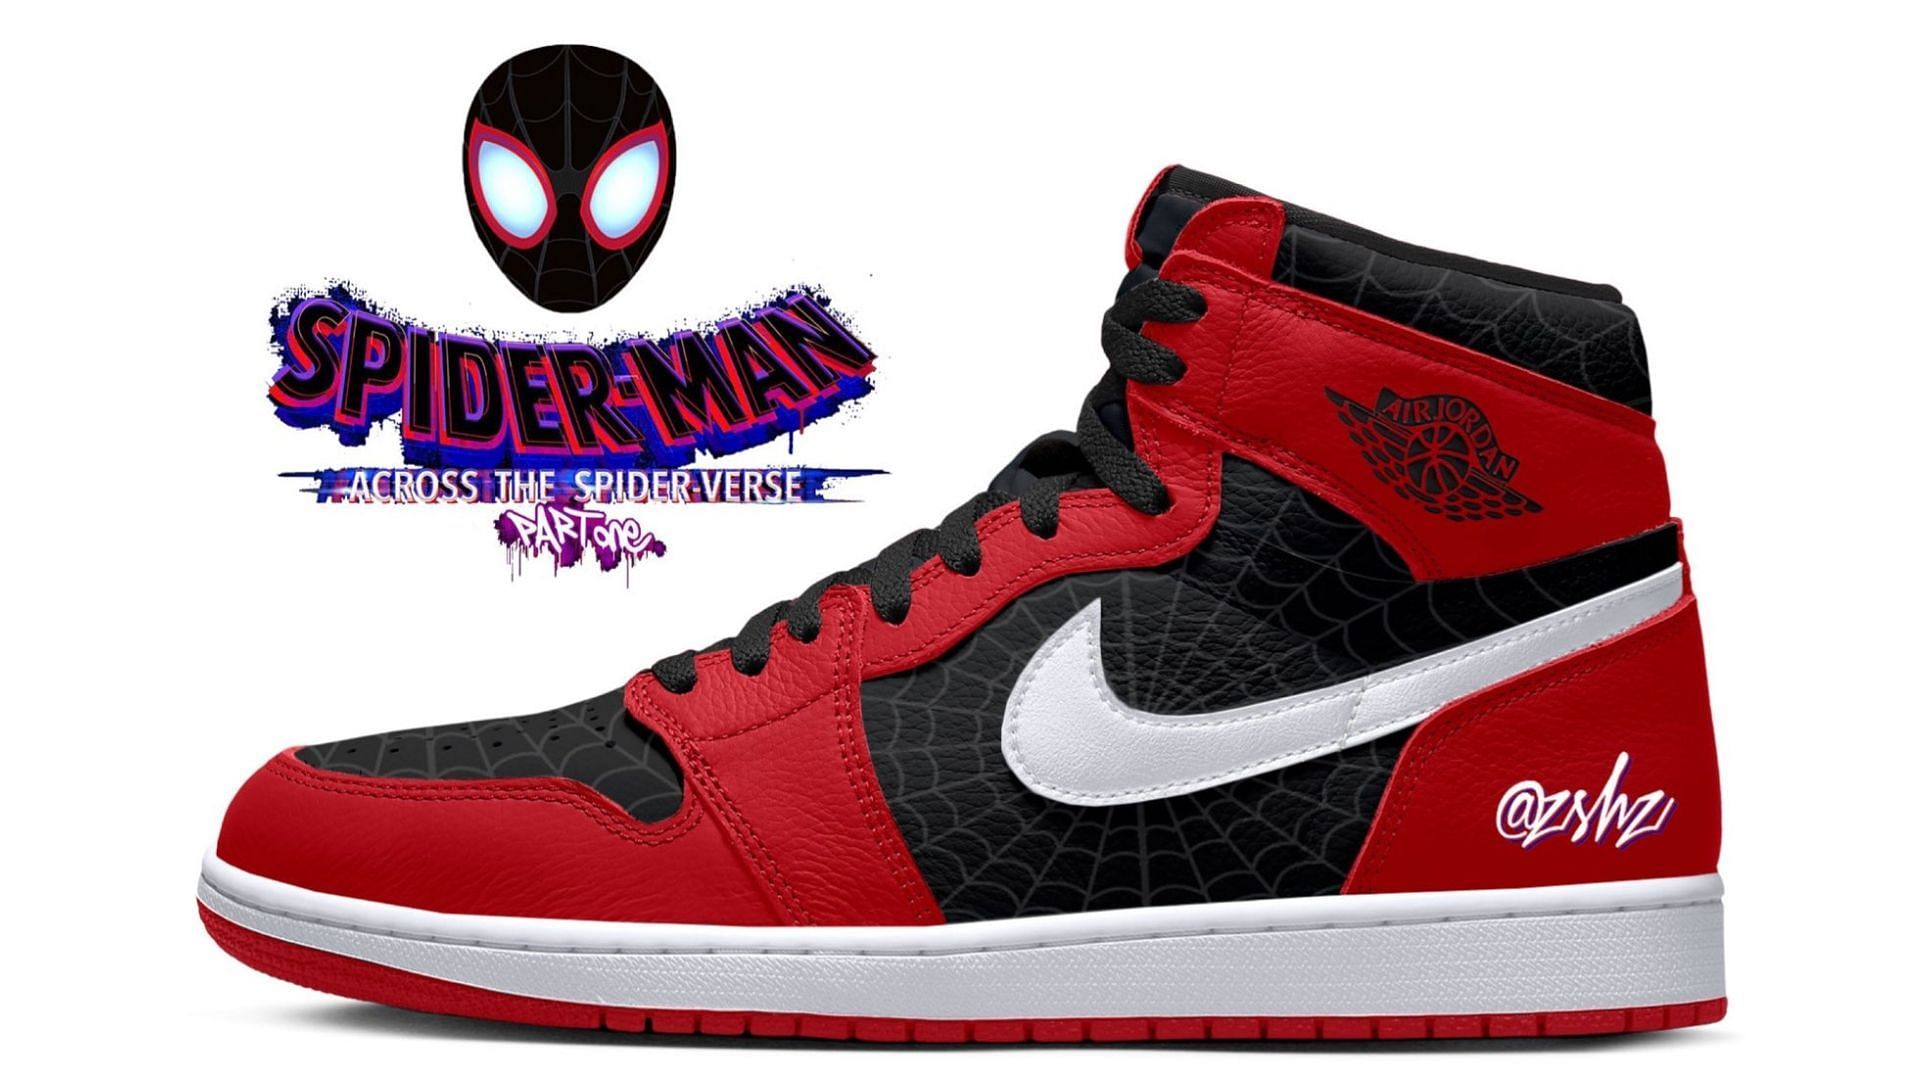 Take a look at the impending Spider-Man: Across the Spider-Verse inspired by AJ1 High OG shoes (Image via Instagram/@sneakerheadz)